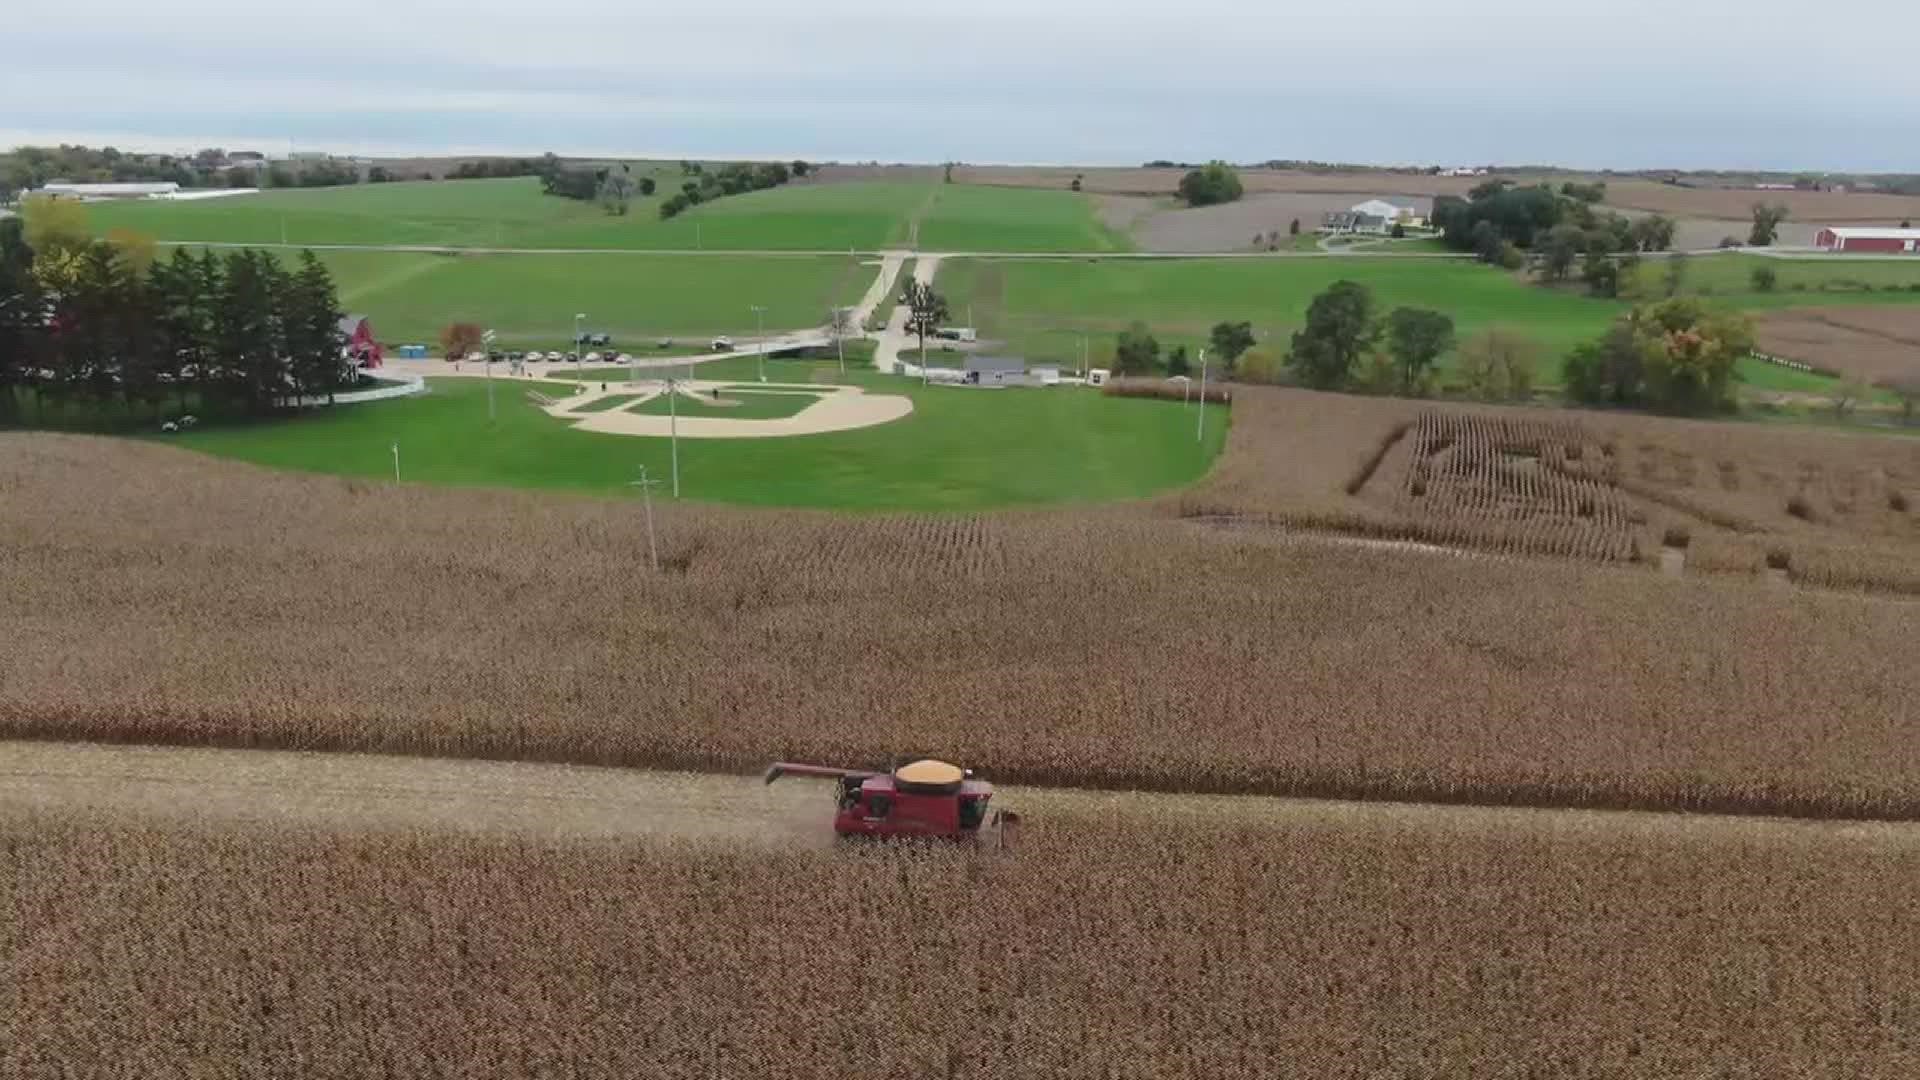 The Rahe brothers harvested the 140-acre cornfield that surrounds the Field of Dreams movie site, and the harvest yields around 31,000 bushels of corn.